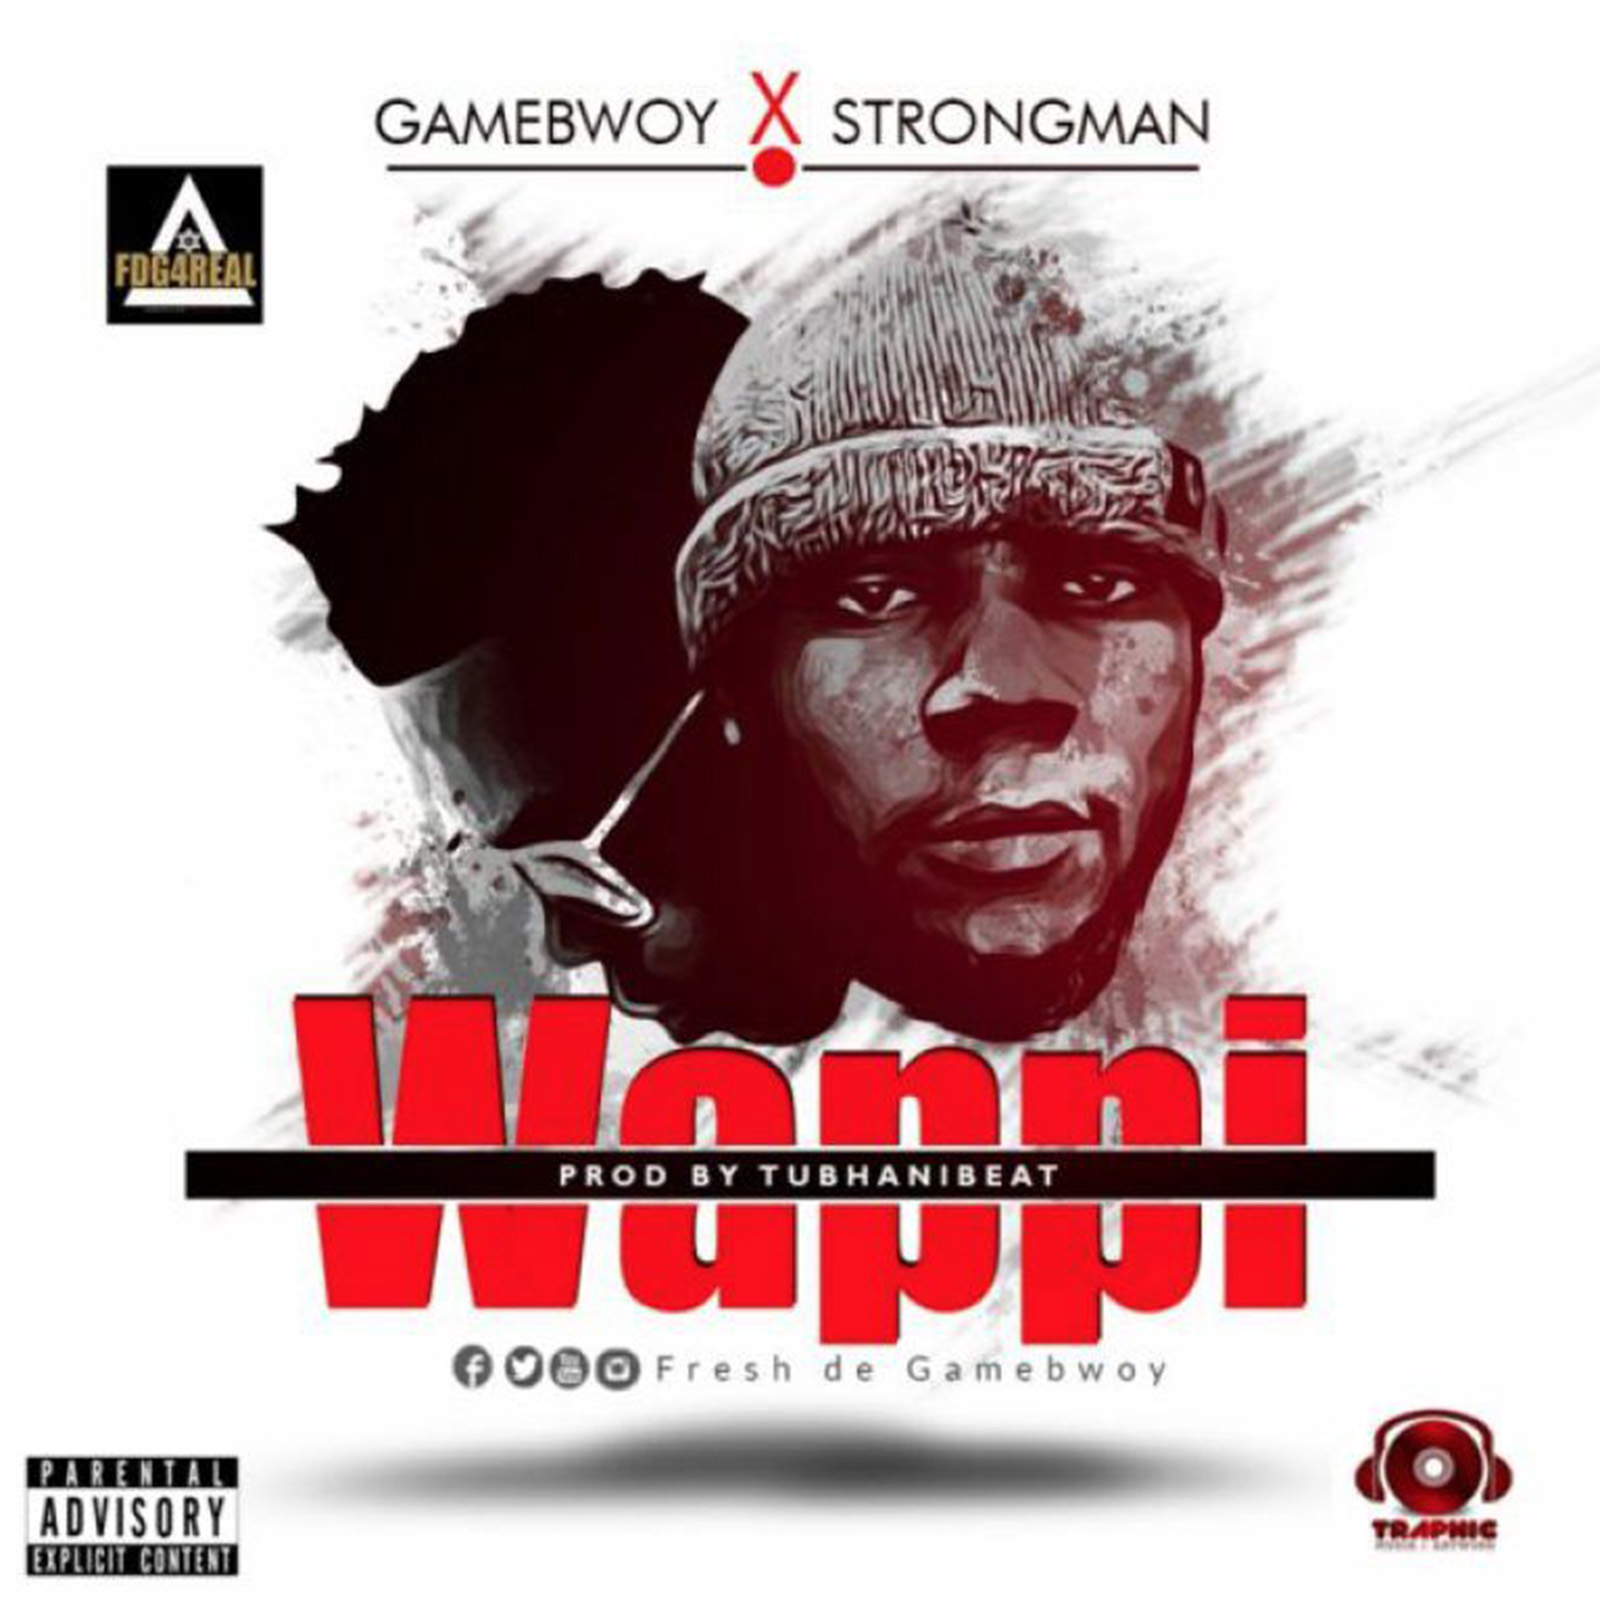 Wappi by Gameboy & Strongman